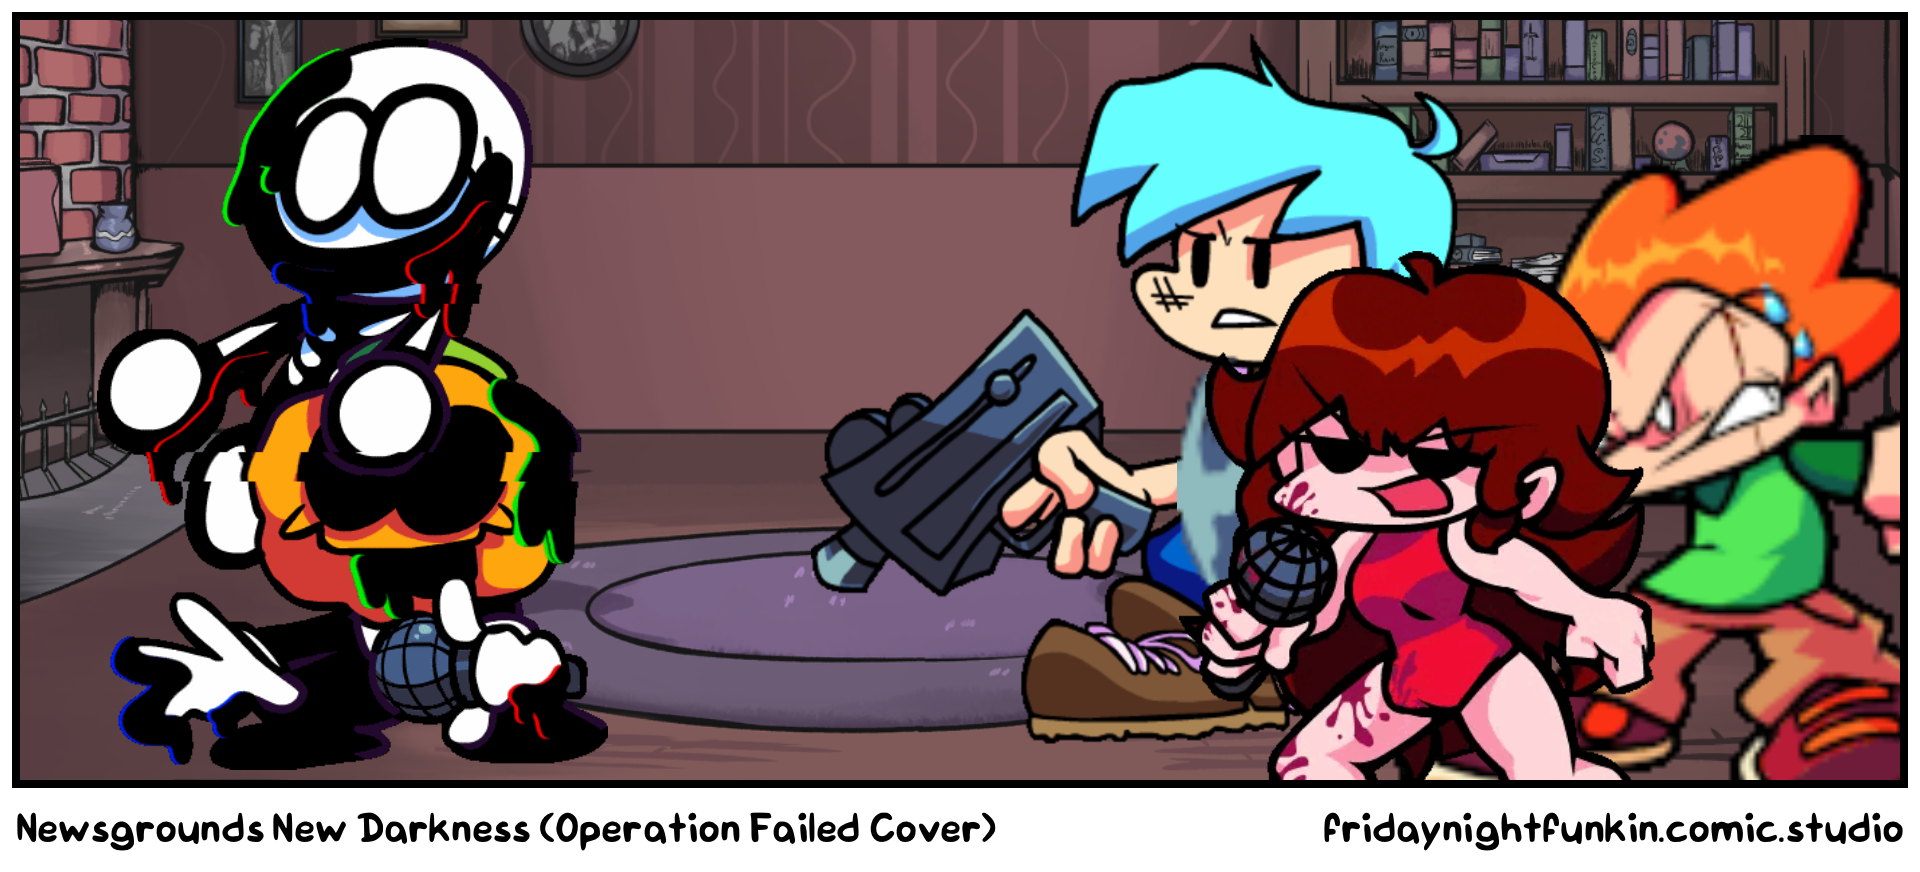 Newsgrounds New Darkness (Operation Failed Cover)